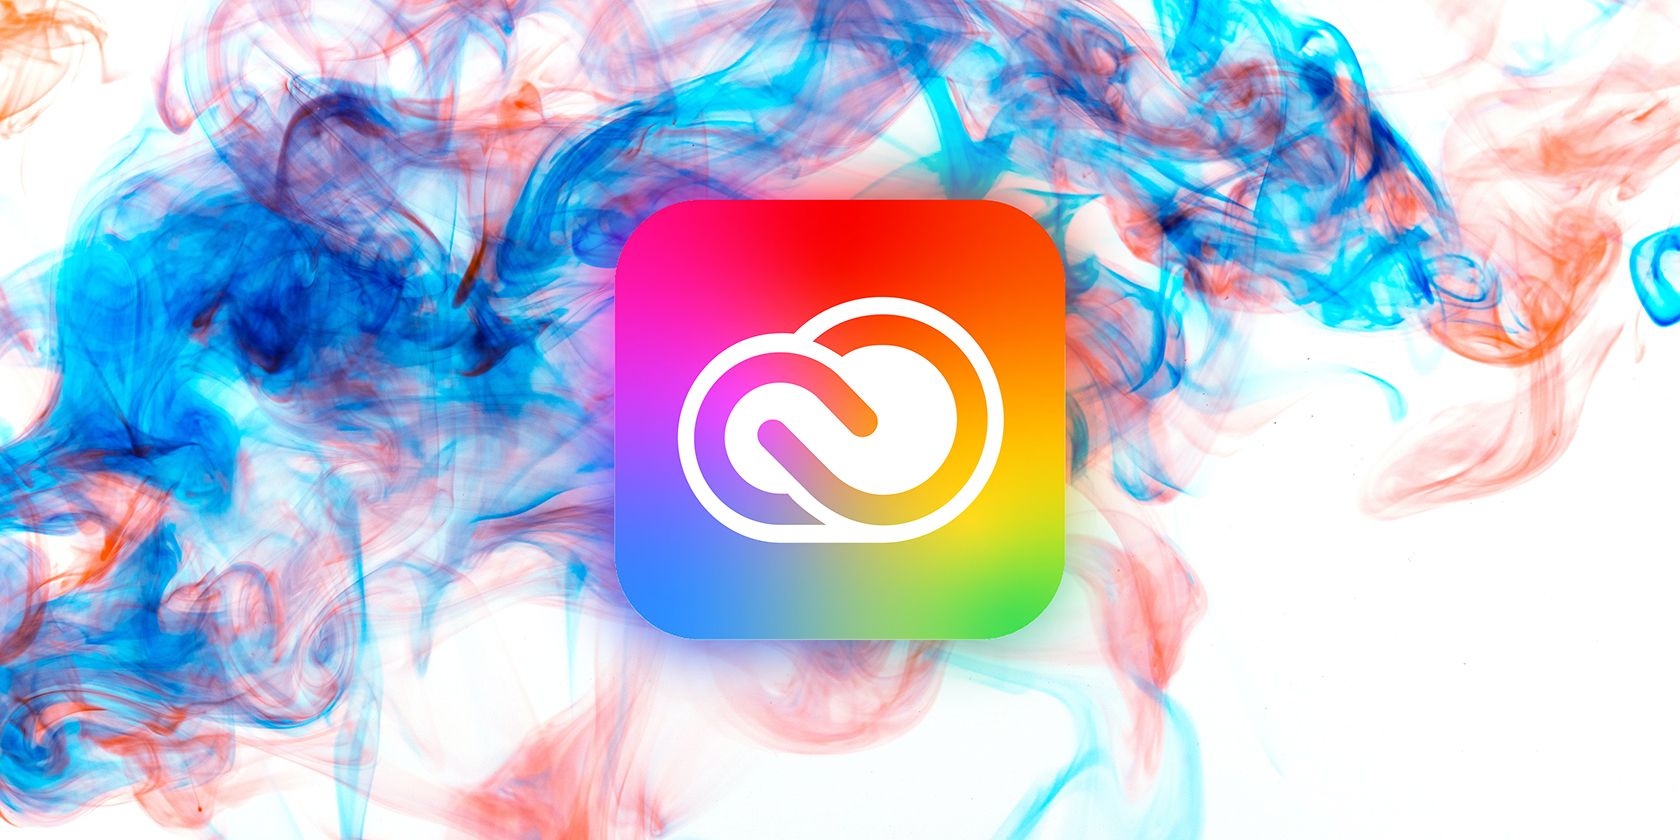 Adobe Creative Cloud logo with a background of pink and blue clouds.